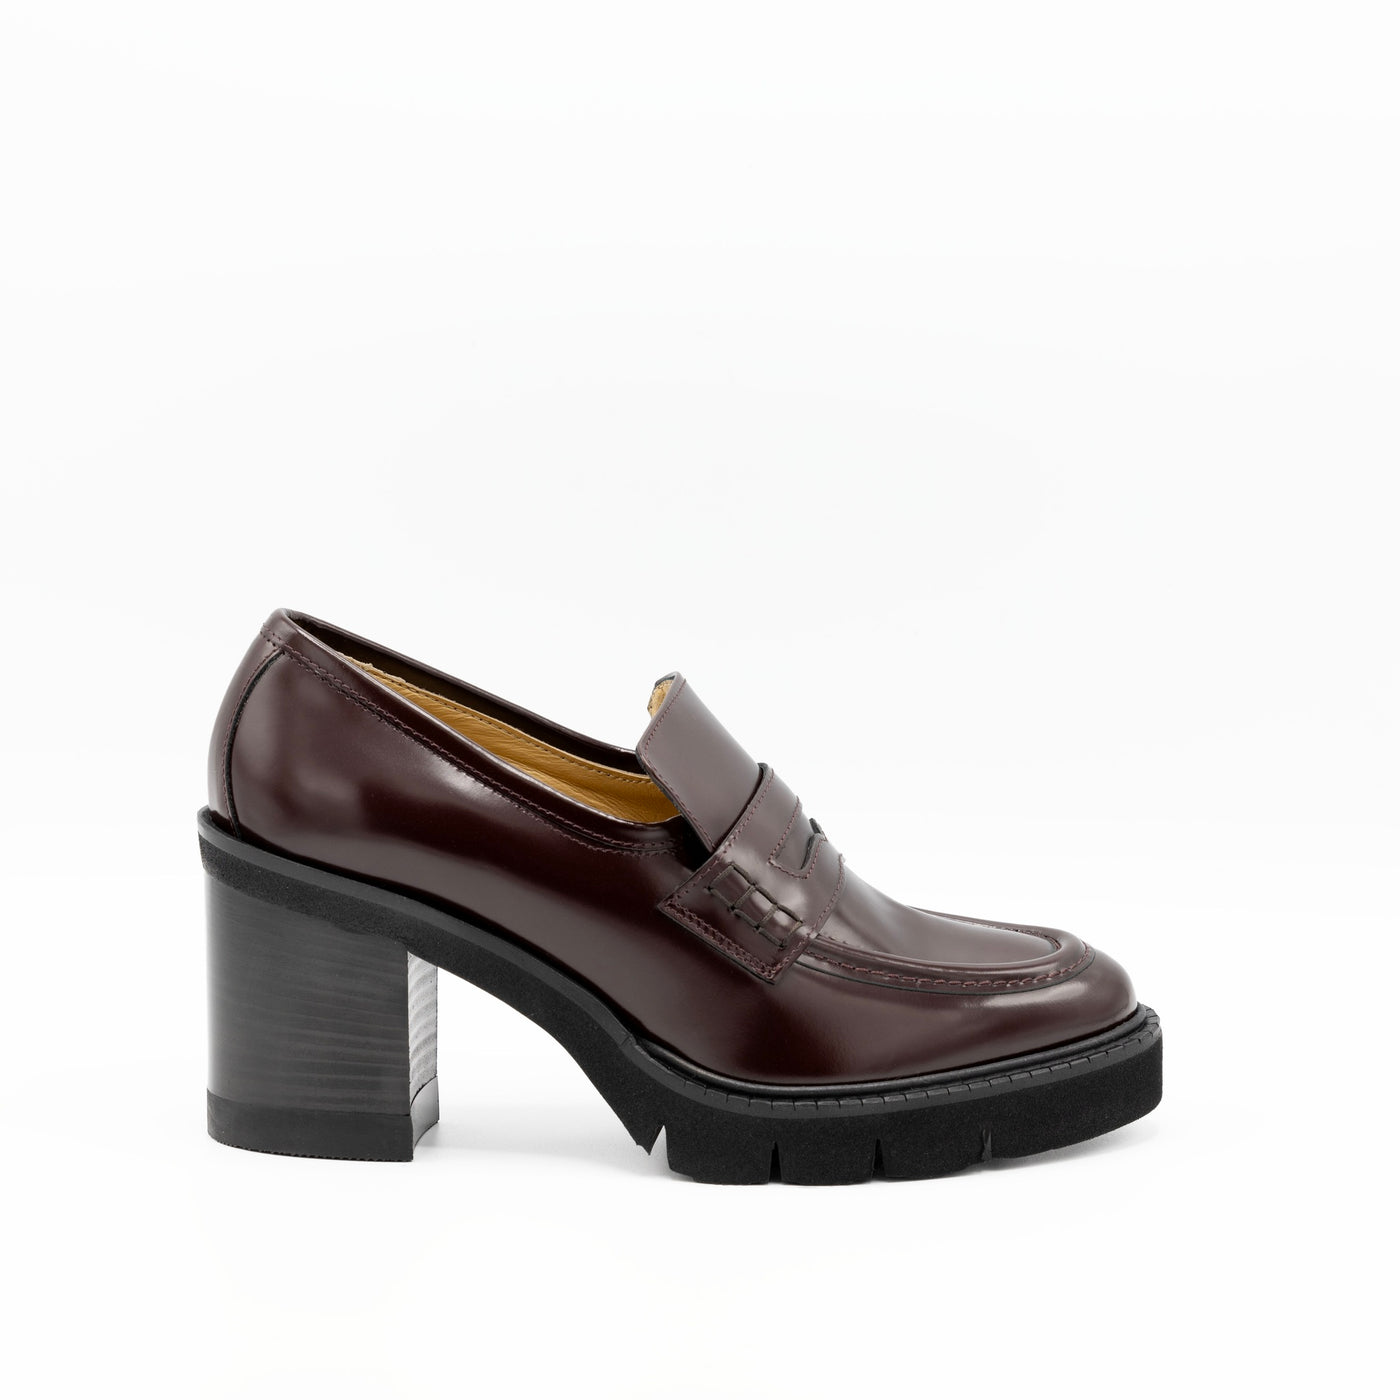 Heeled loafers in burgundy leather with rubber sole